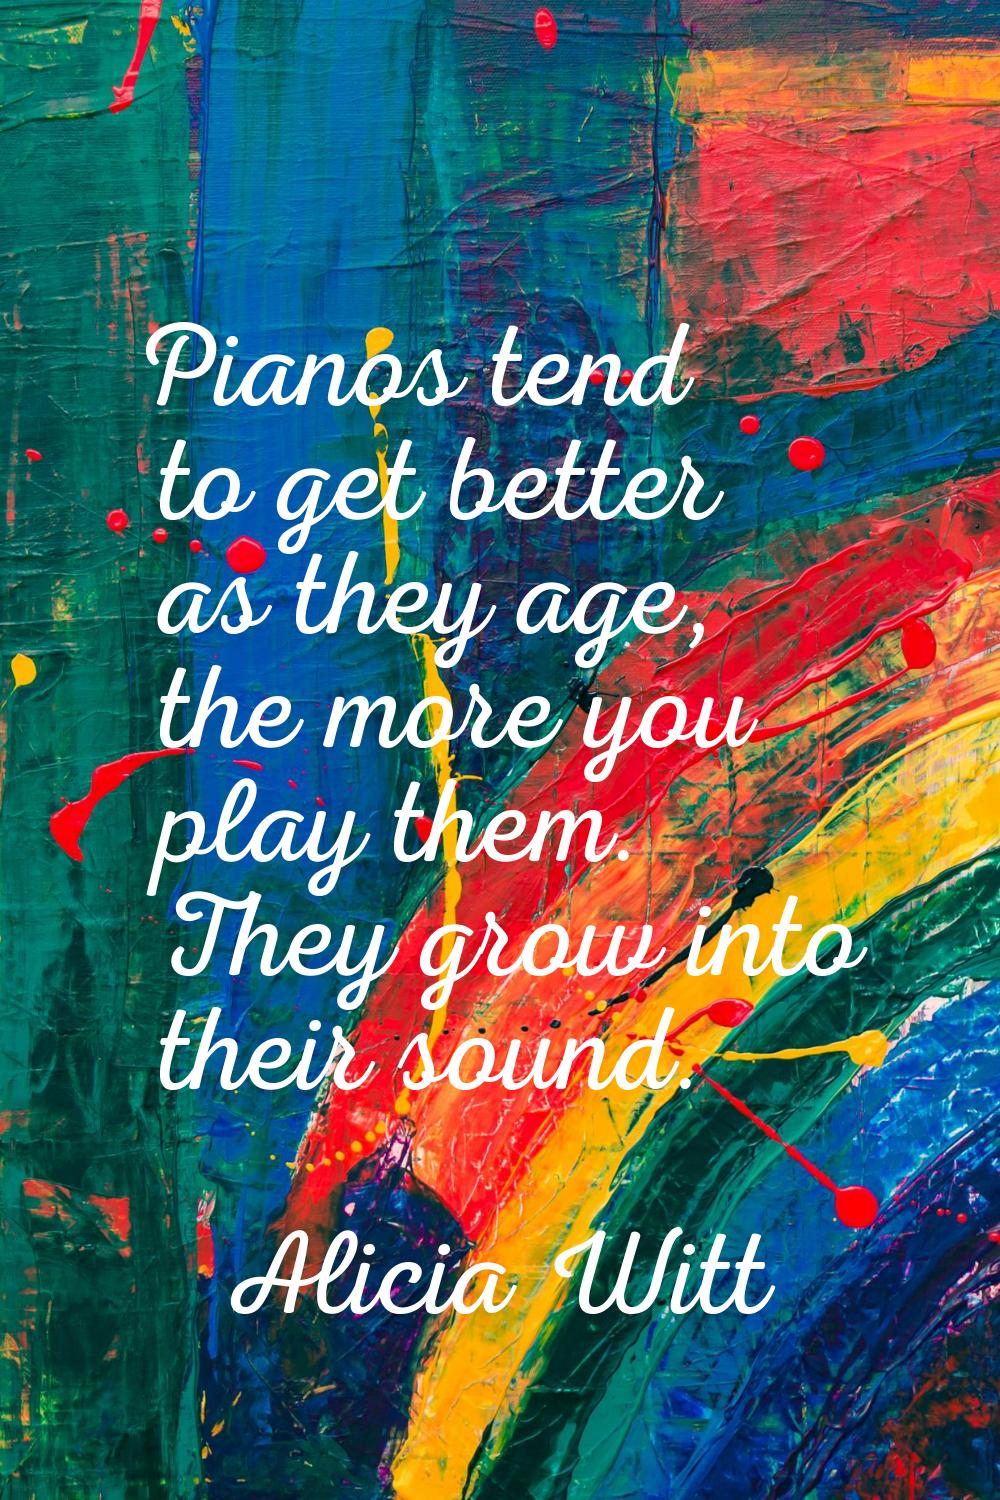 Pianos tend to get better as they age, the more you play them. They grow into their sound.